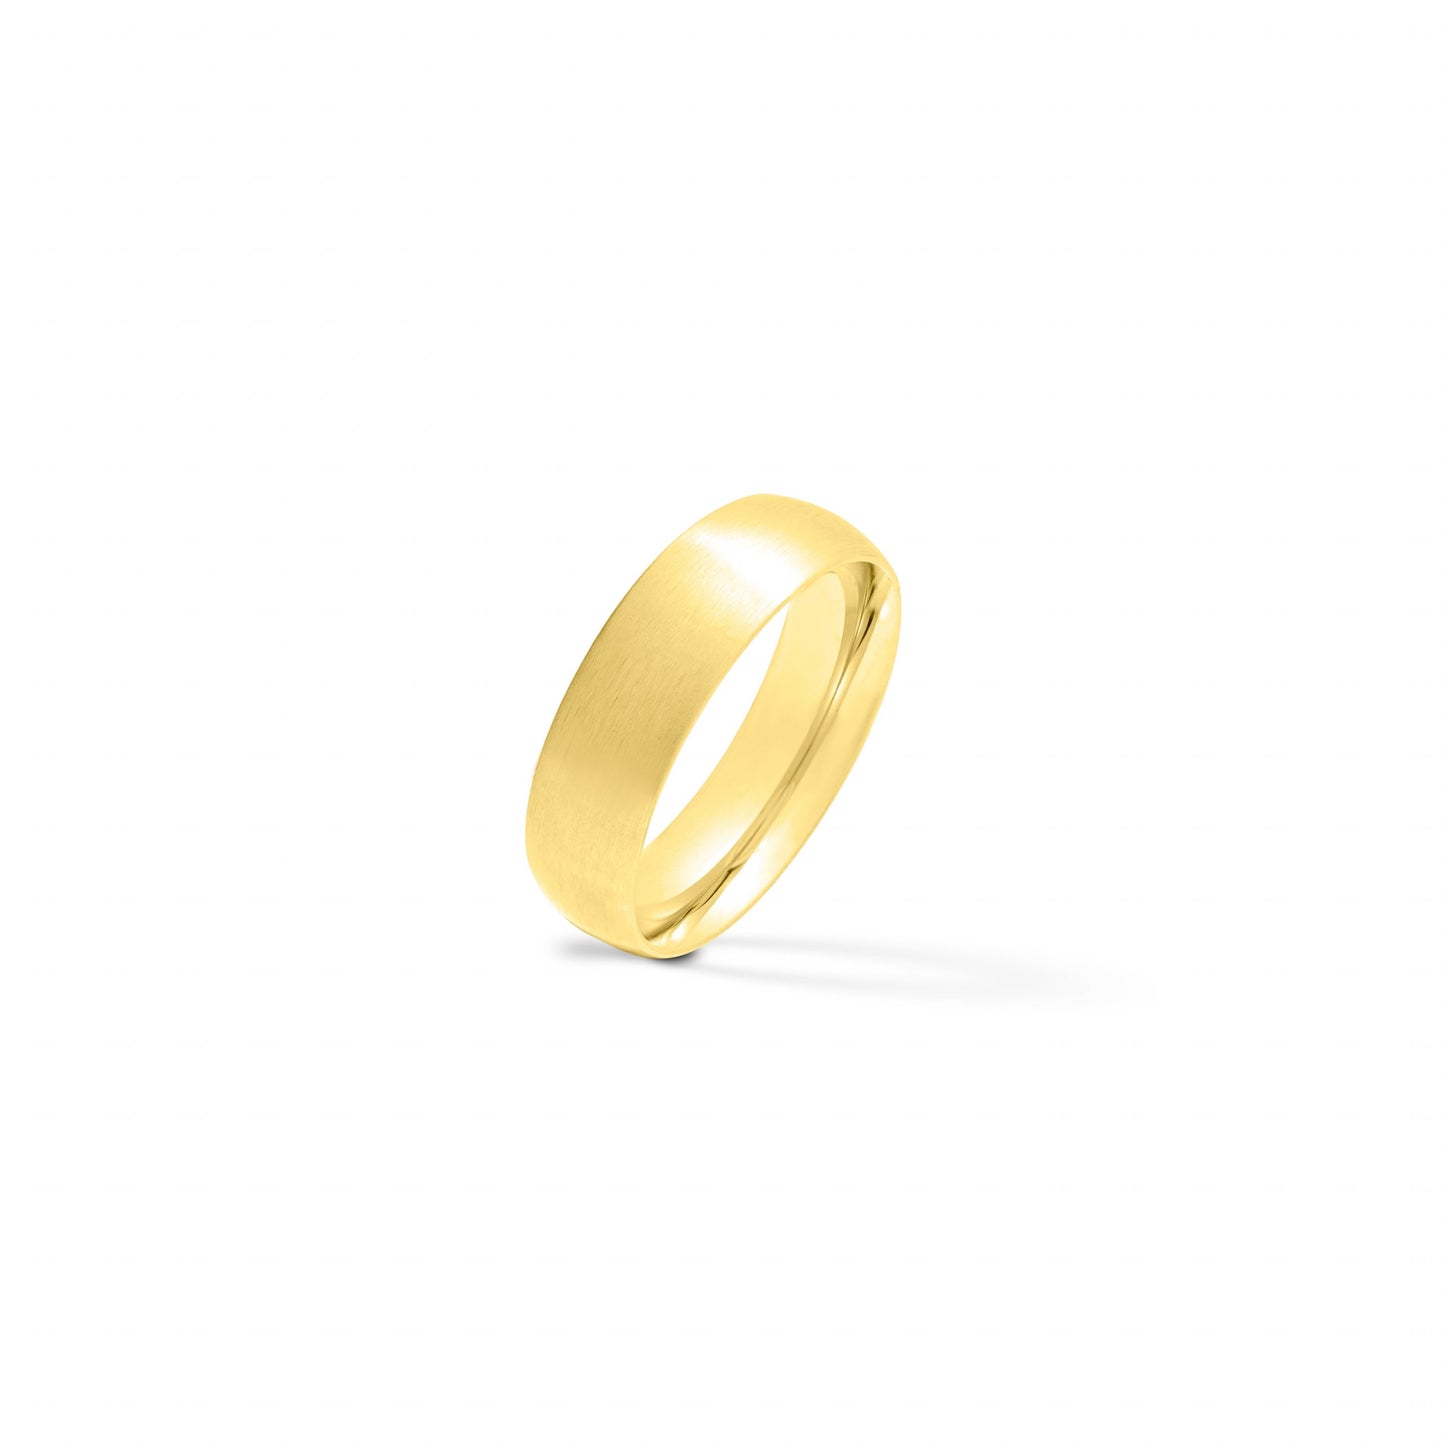 Brushed Mate Gold Plated Stainless Steel Ring